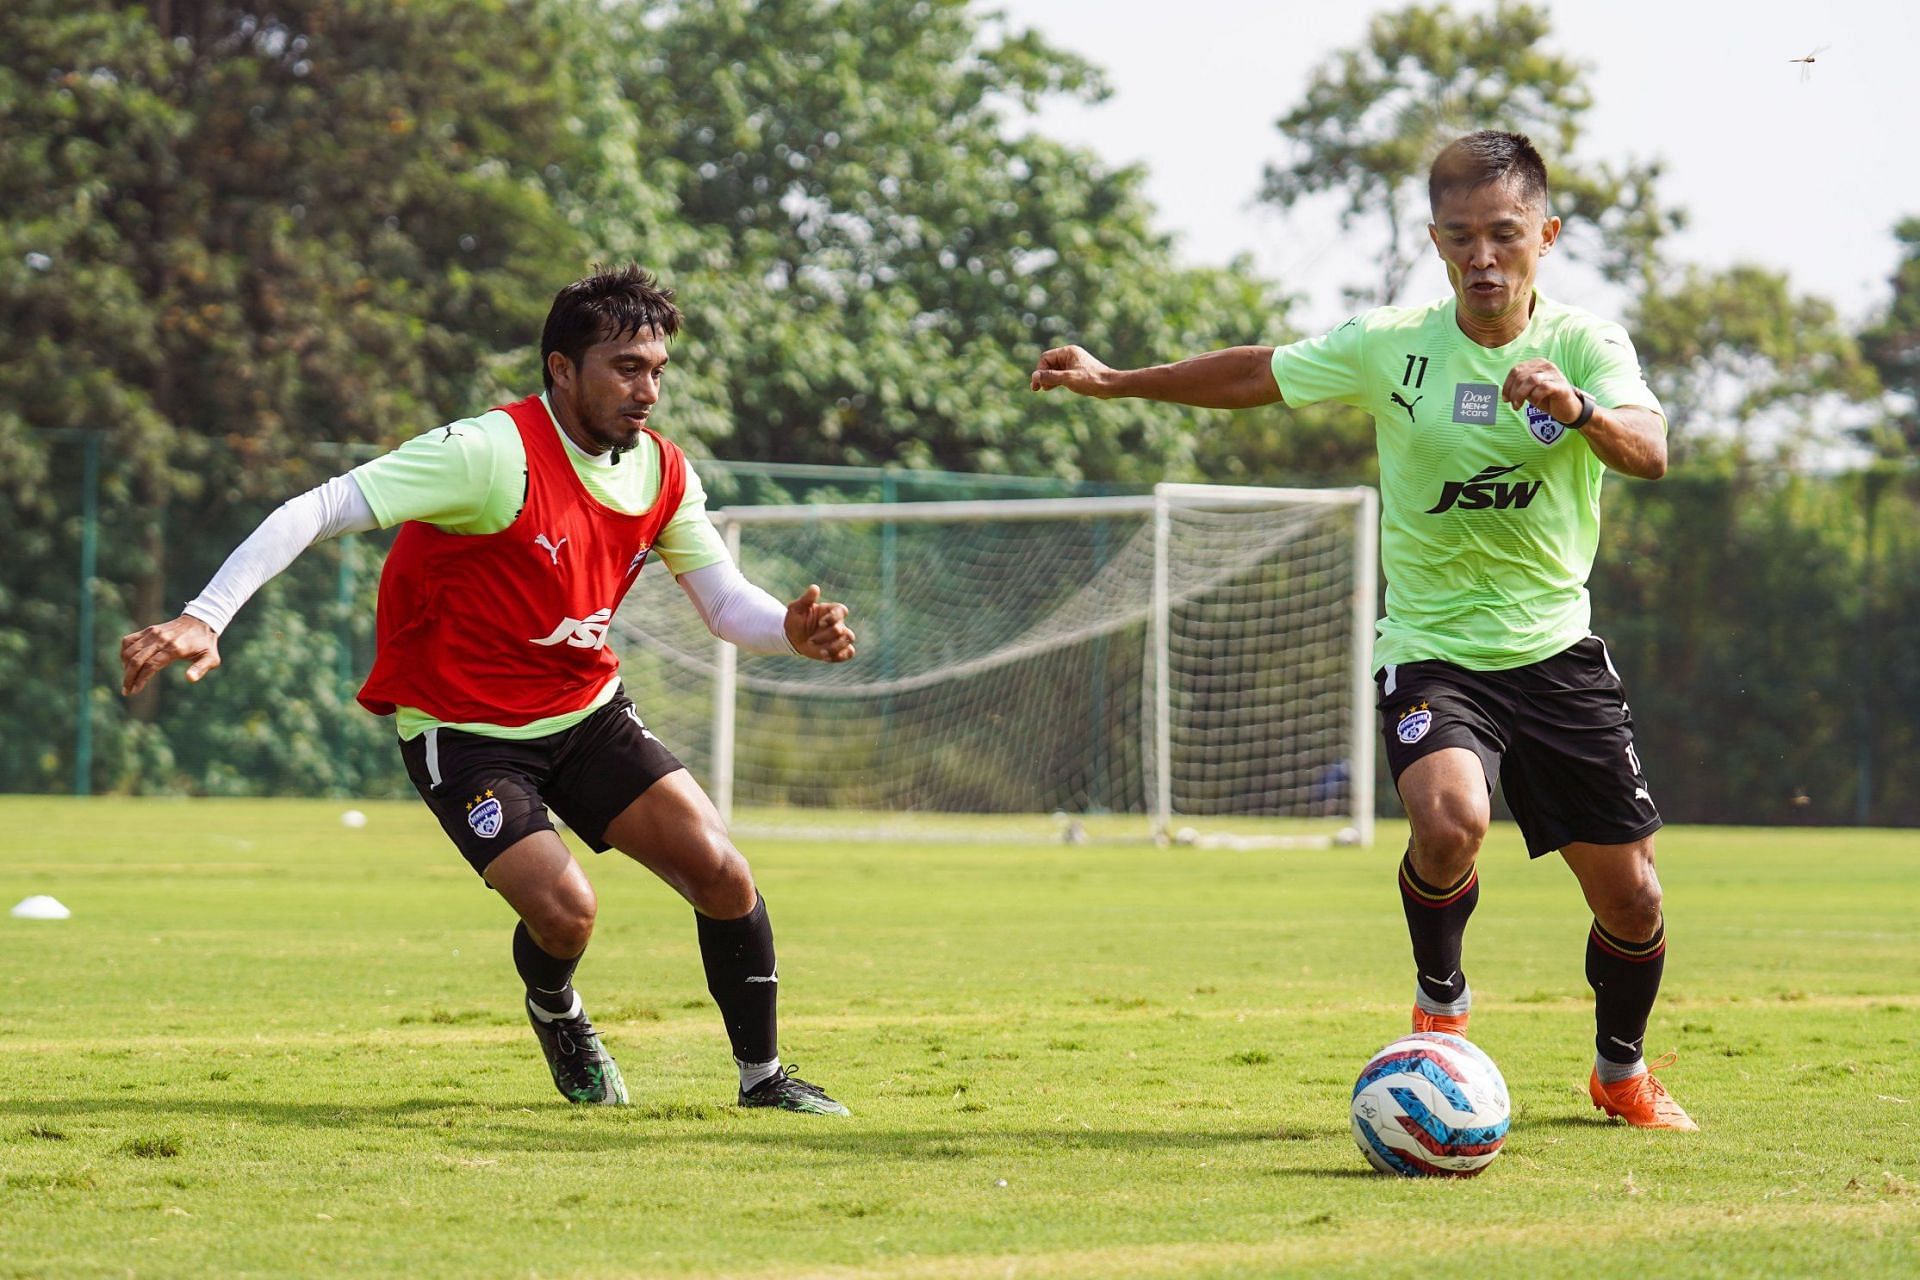 Bengaluru FC players gearing up for the Hyderabad FC challenge.